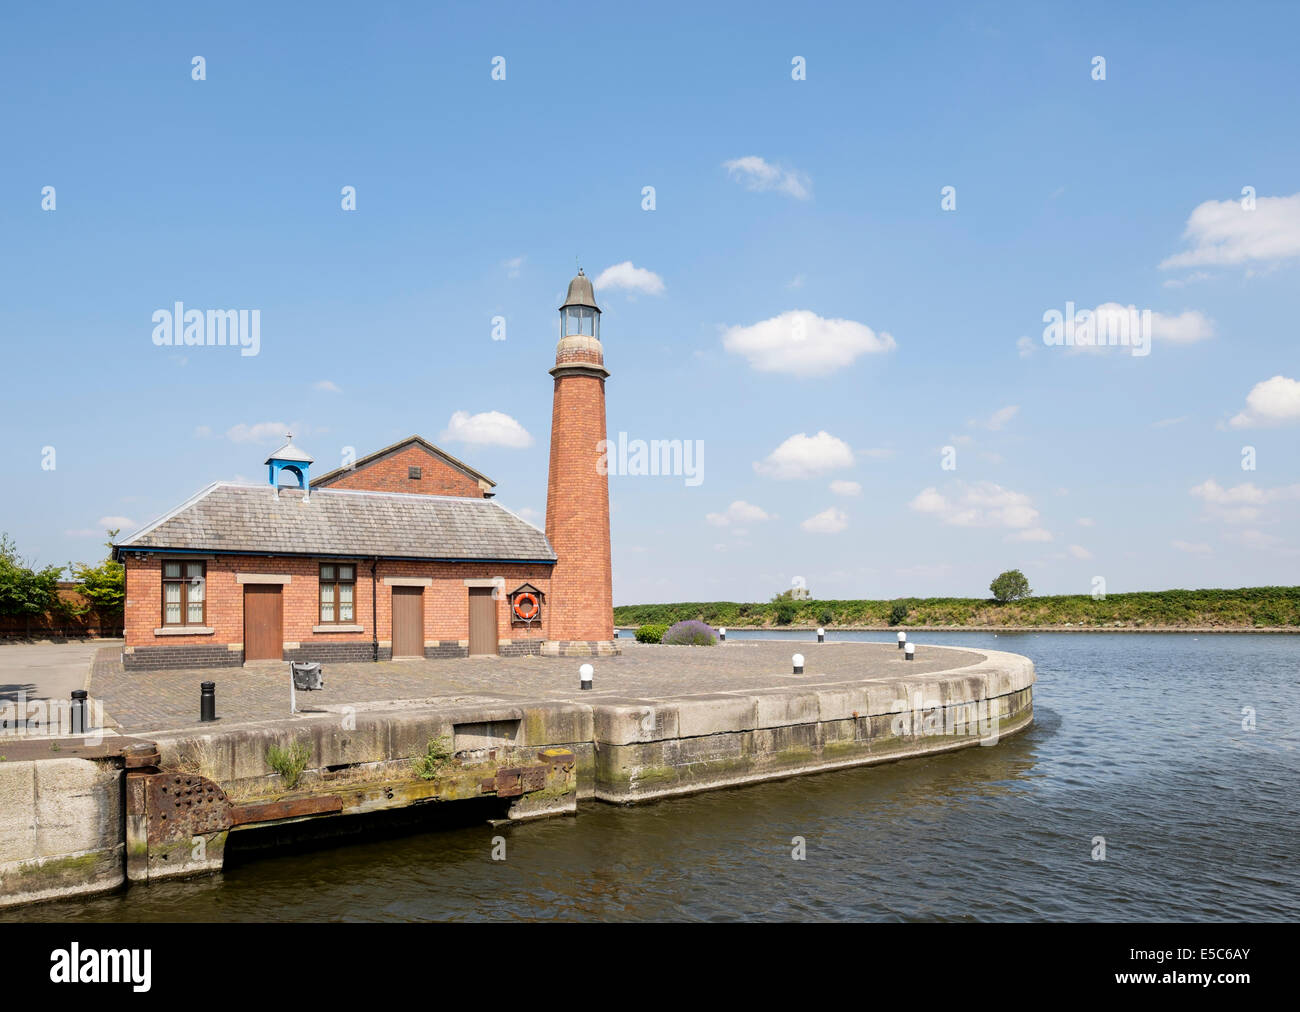 Whitby lighthouse at junction between Shropshire Union Canal and Manchester Ship Canal Ellesmere Port Wirral Cheshire England UK Stock Photo